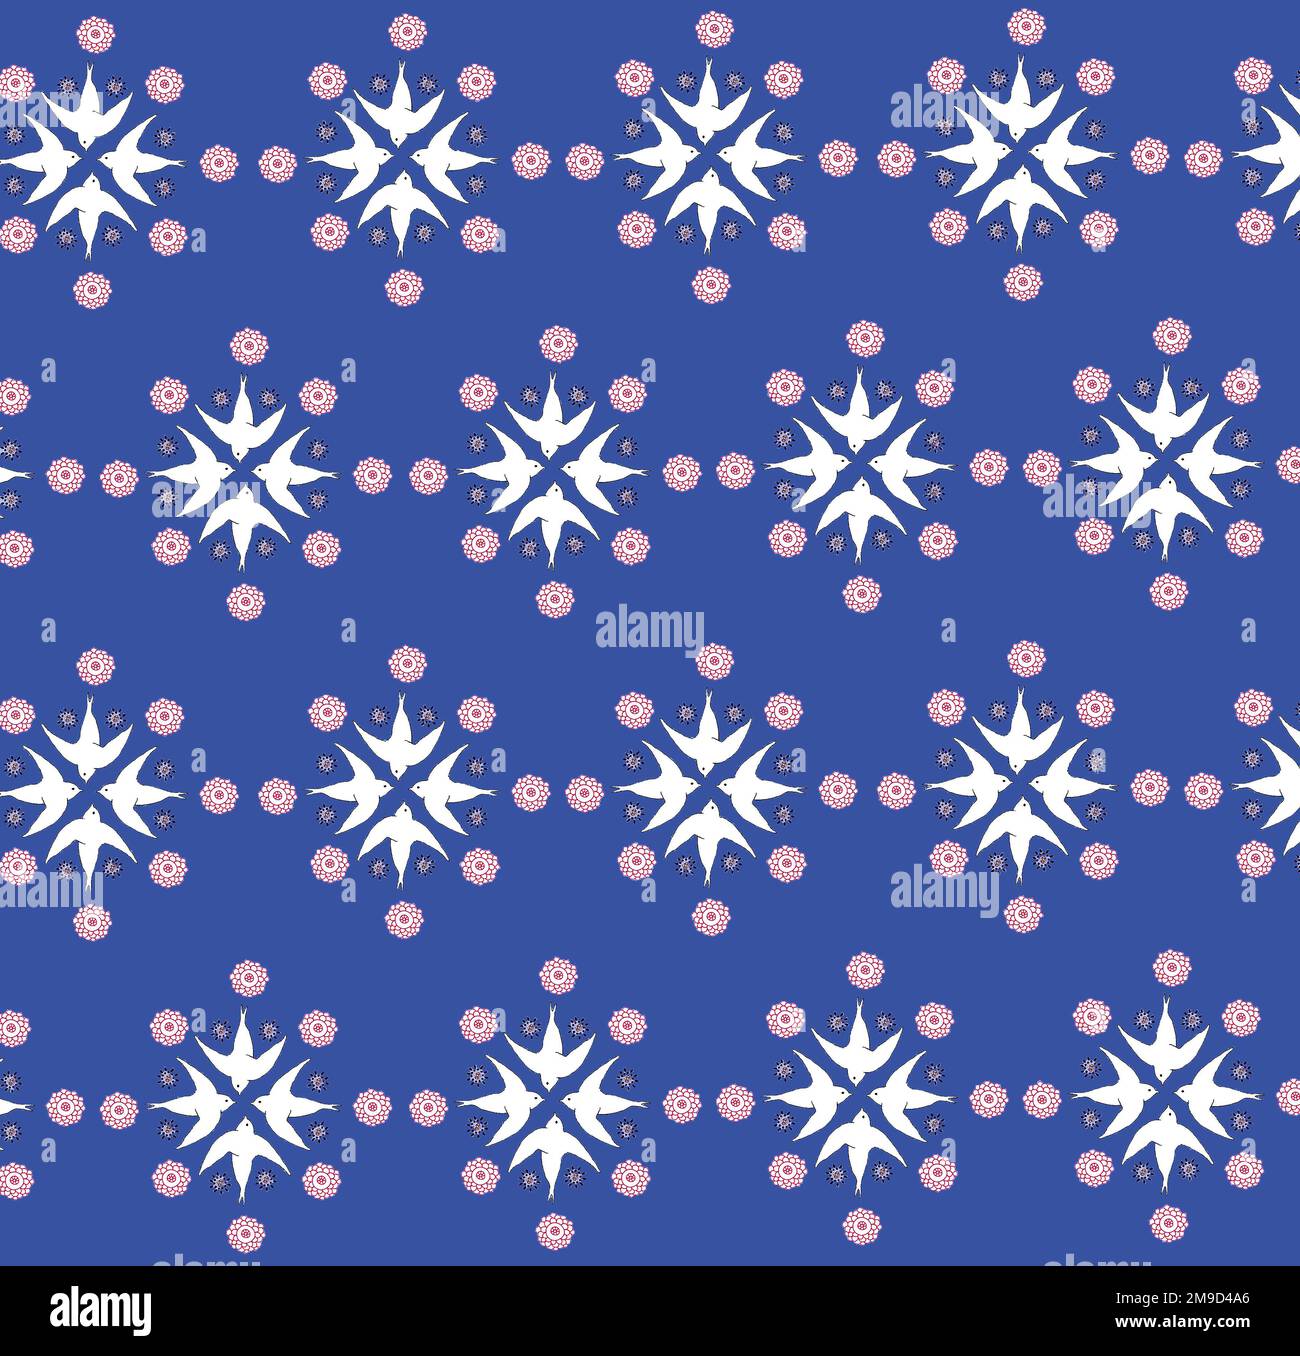 A repeating pattern featuring swifts and florals. Stock Photo